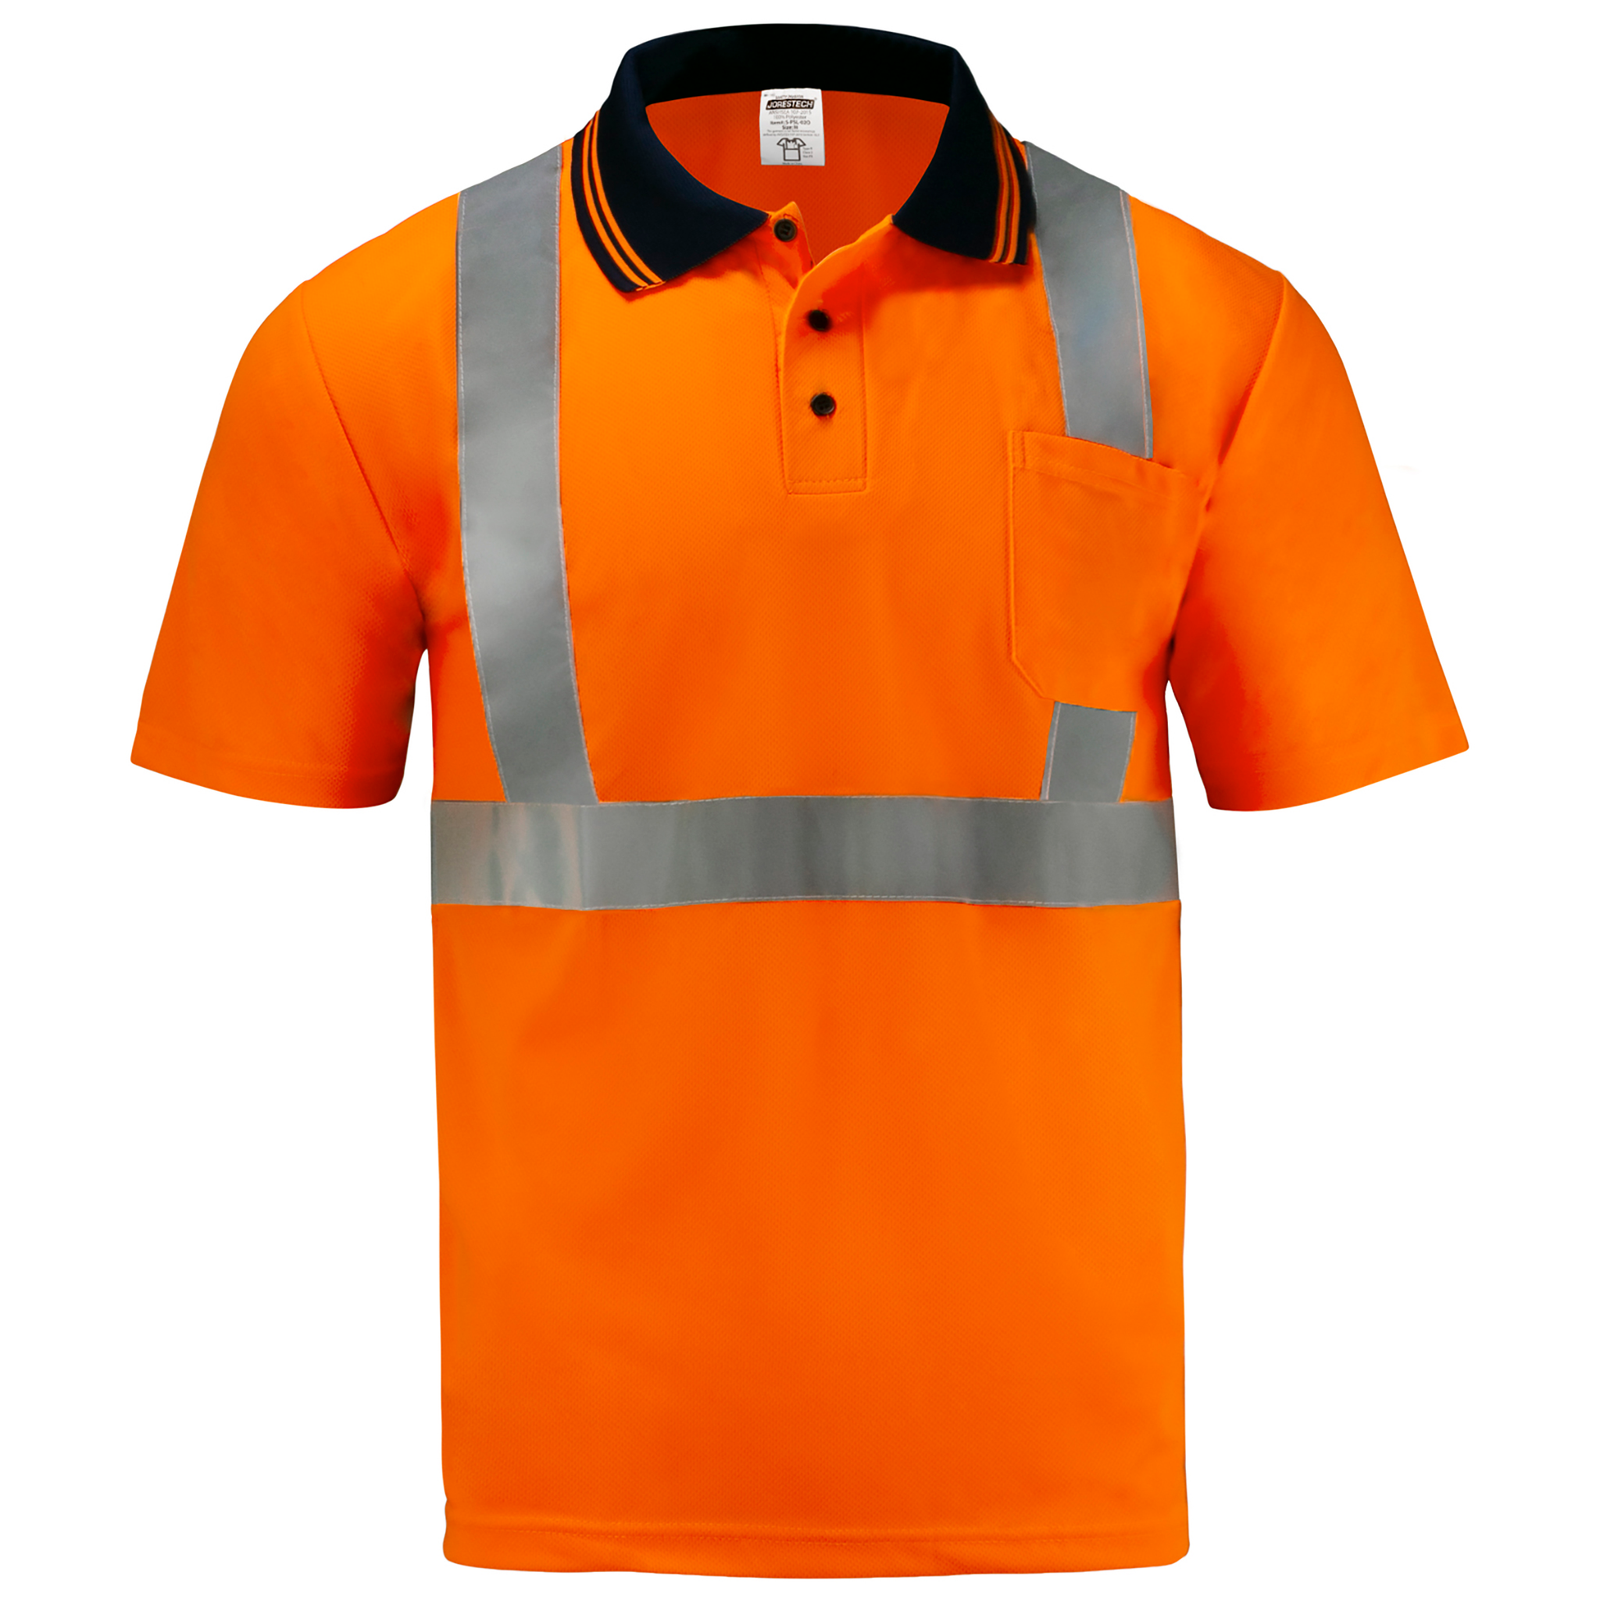 Front view of a Hi-vis orange reflective safety polo shirt. The shirt is short sleeve, has a polo collar and 2 buttons.